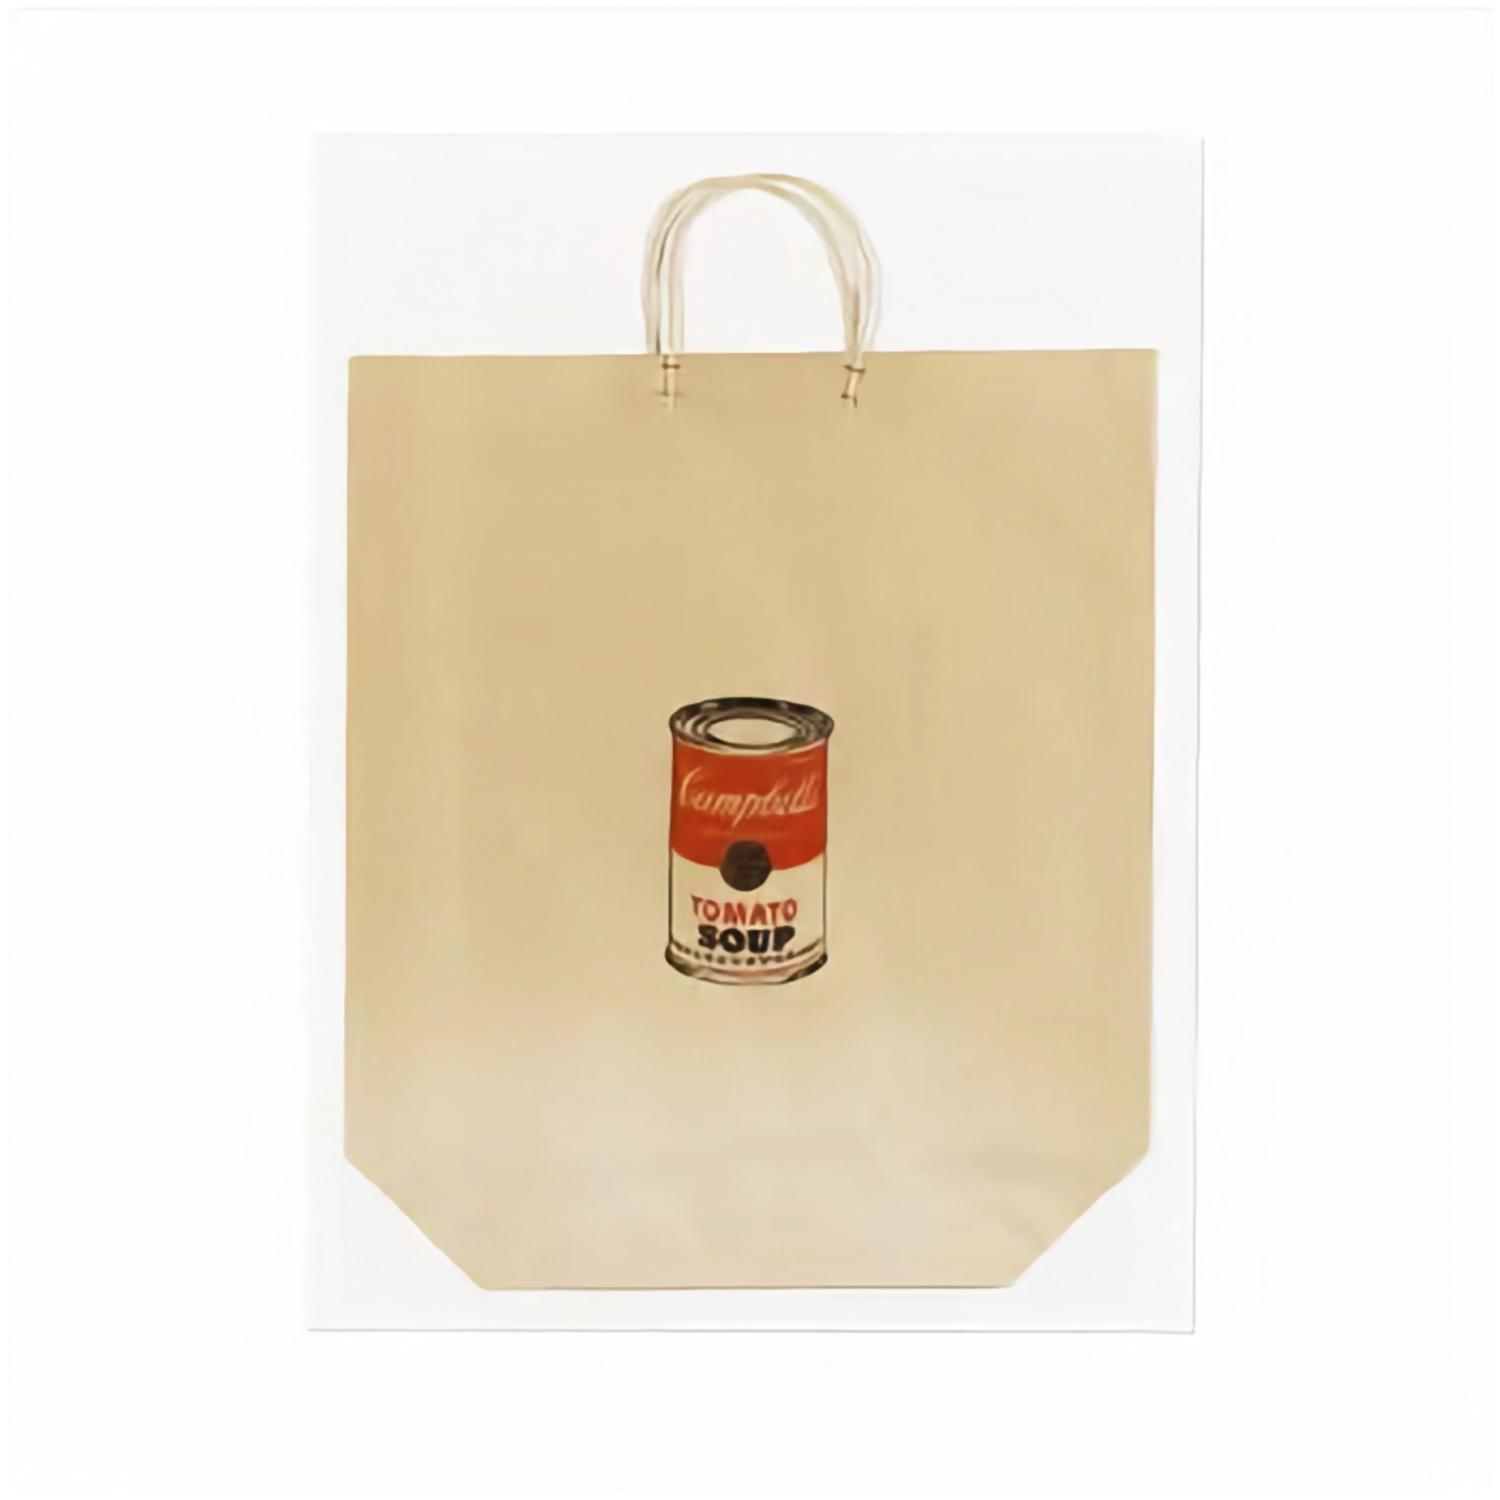 Andy Warhol - Campbell's Soup Can (Tomato) 1964 (Shopping Bag)